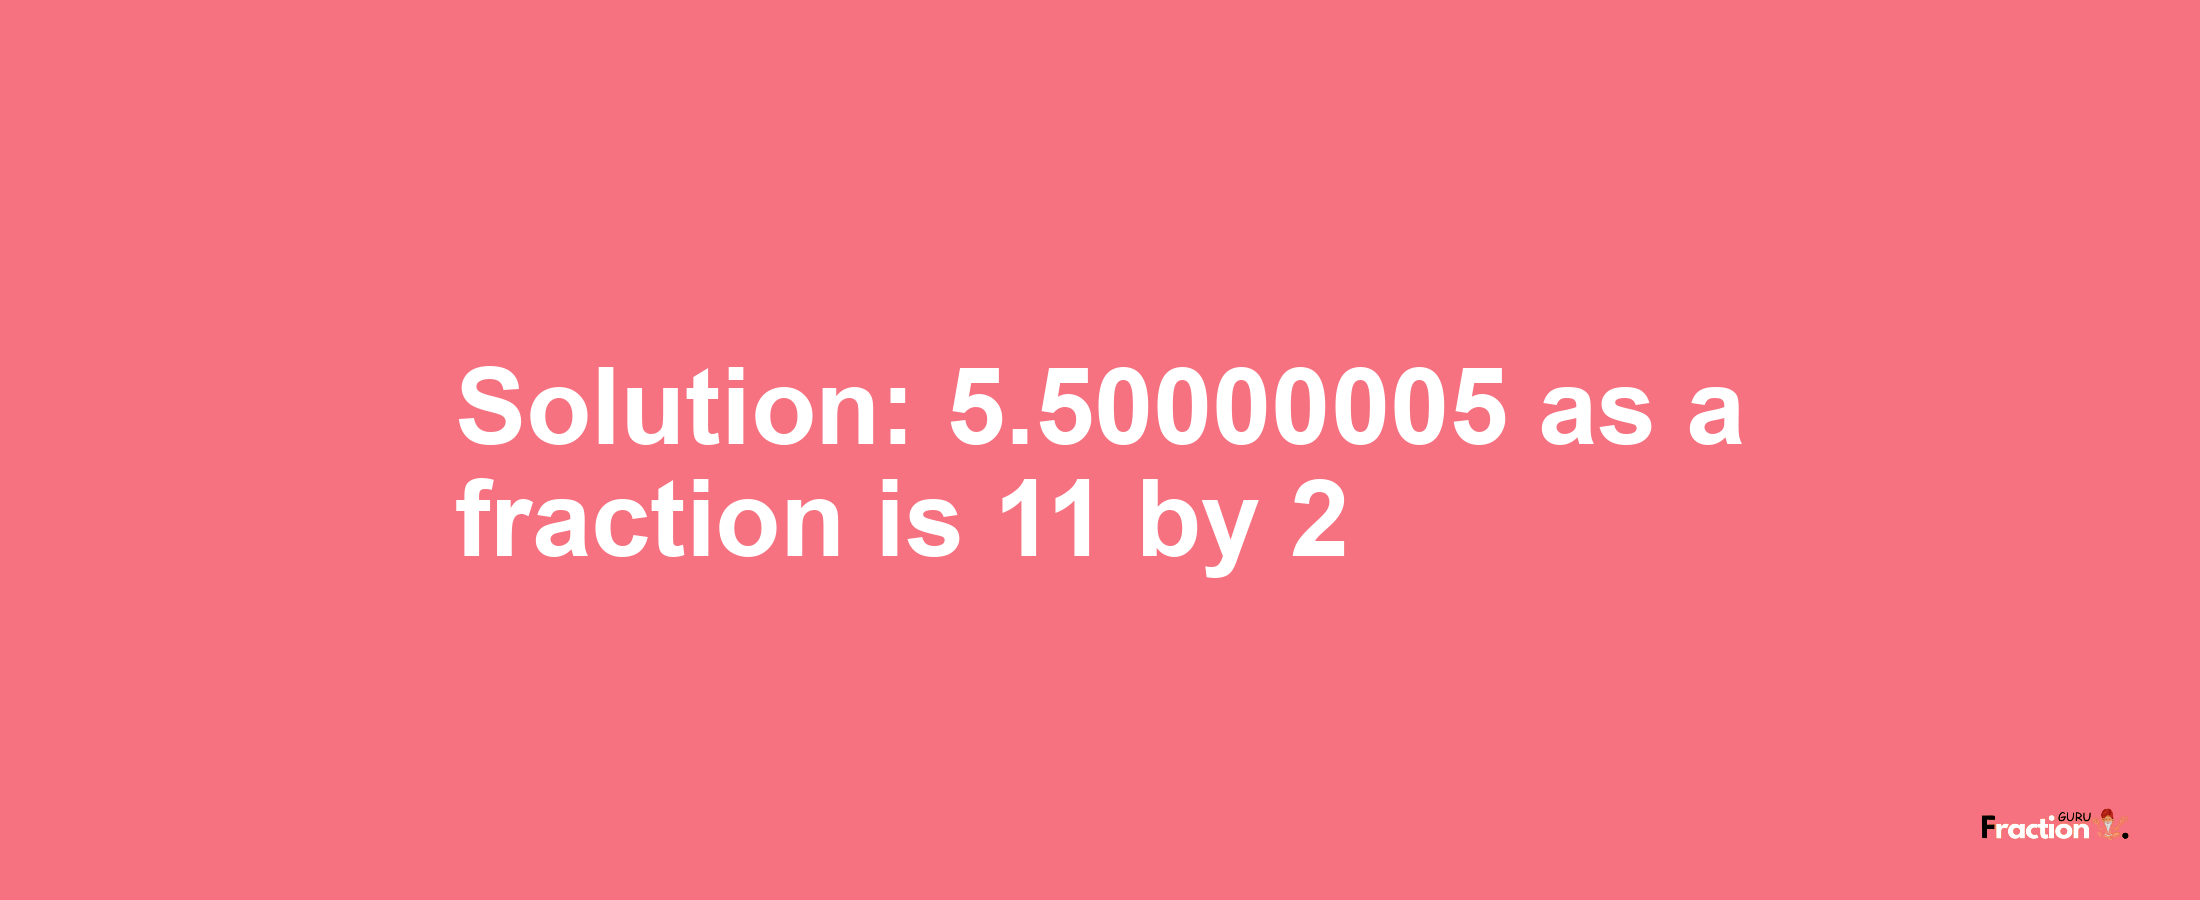 Solution:5.50000005 as a fraction is 11/2